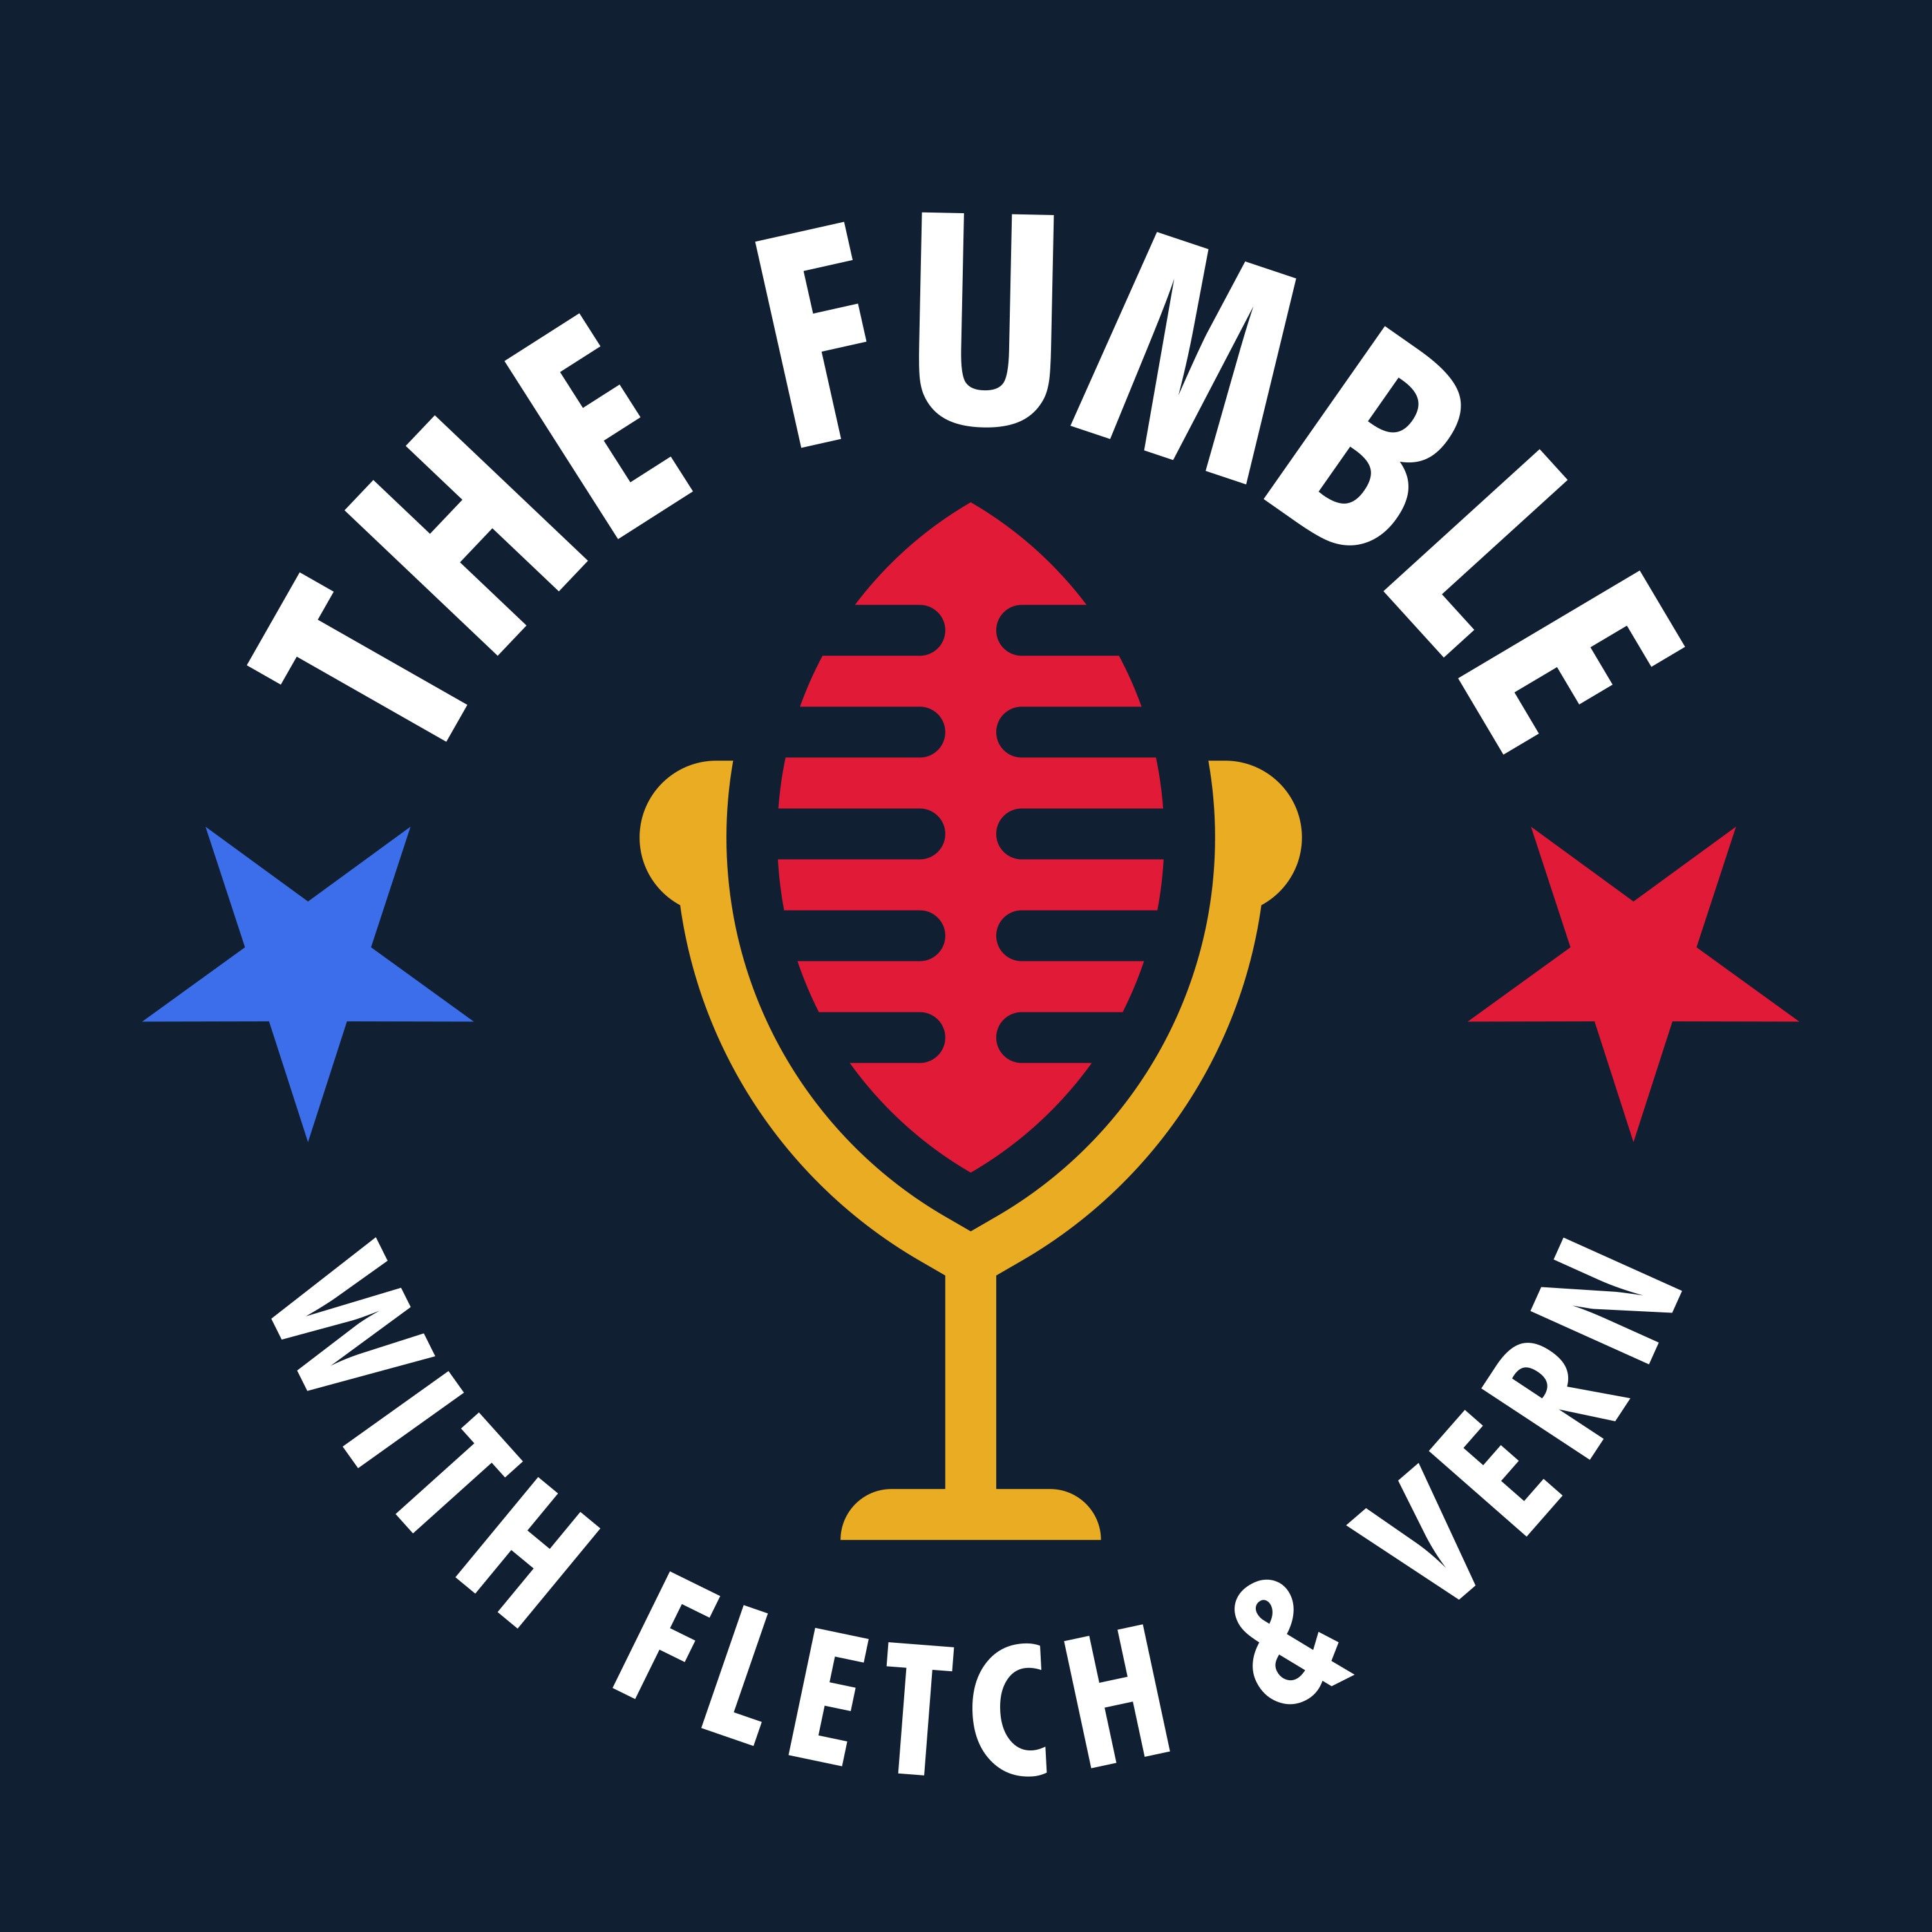 THE FUMBLE with Fletch & Vern TRAILER